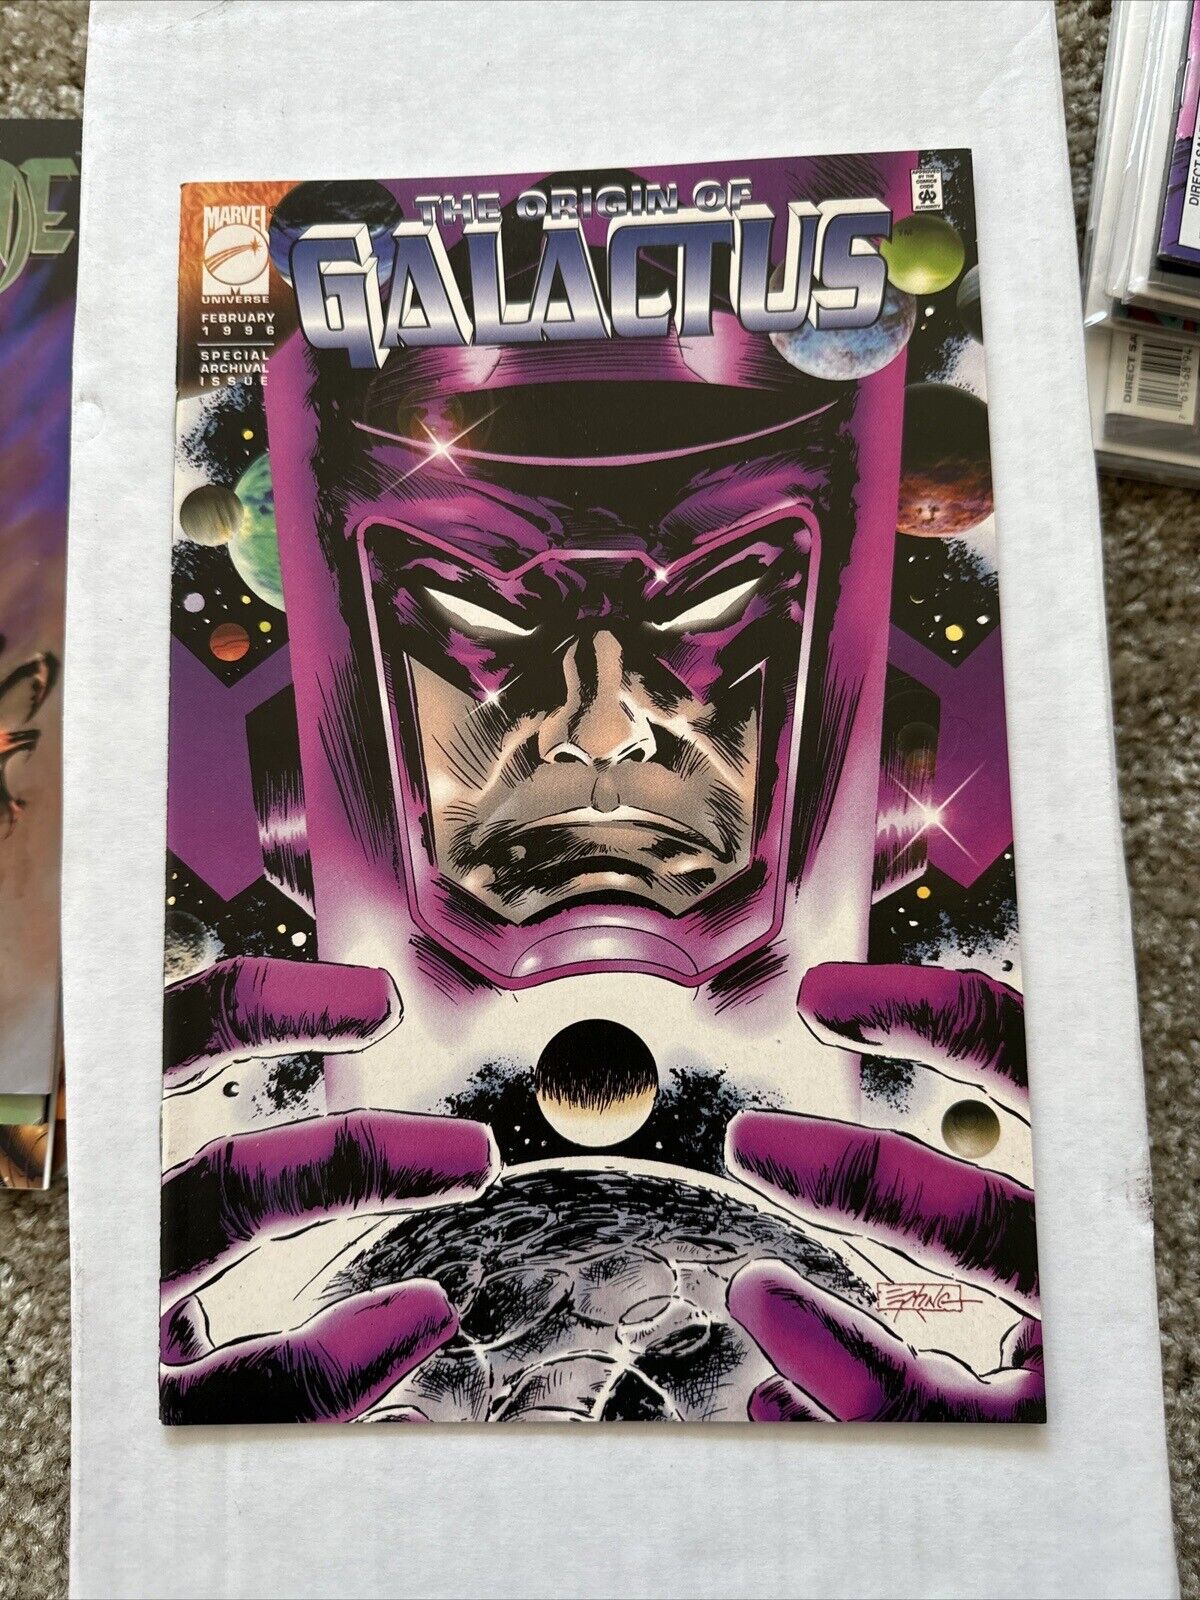 Origin Of Galactus #1 (1996) Special Archival Issue Jack Kirby Marvel Comics VF+